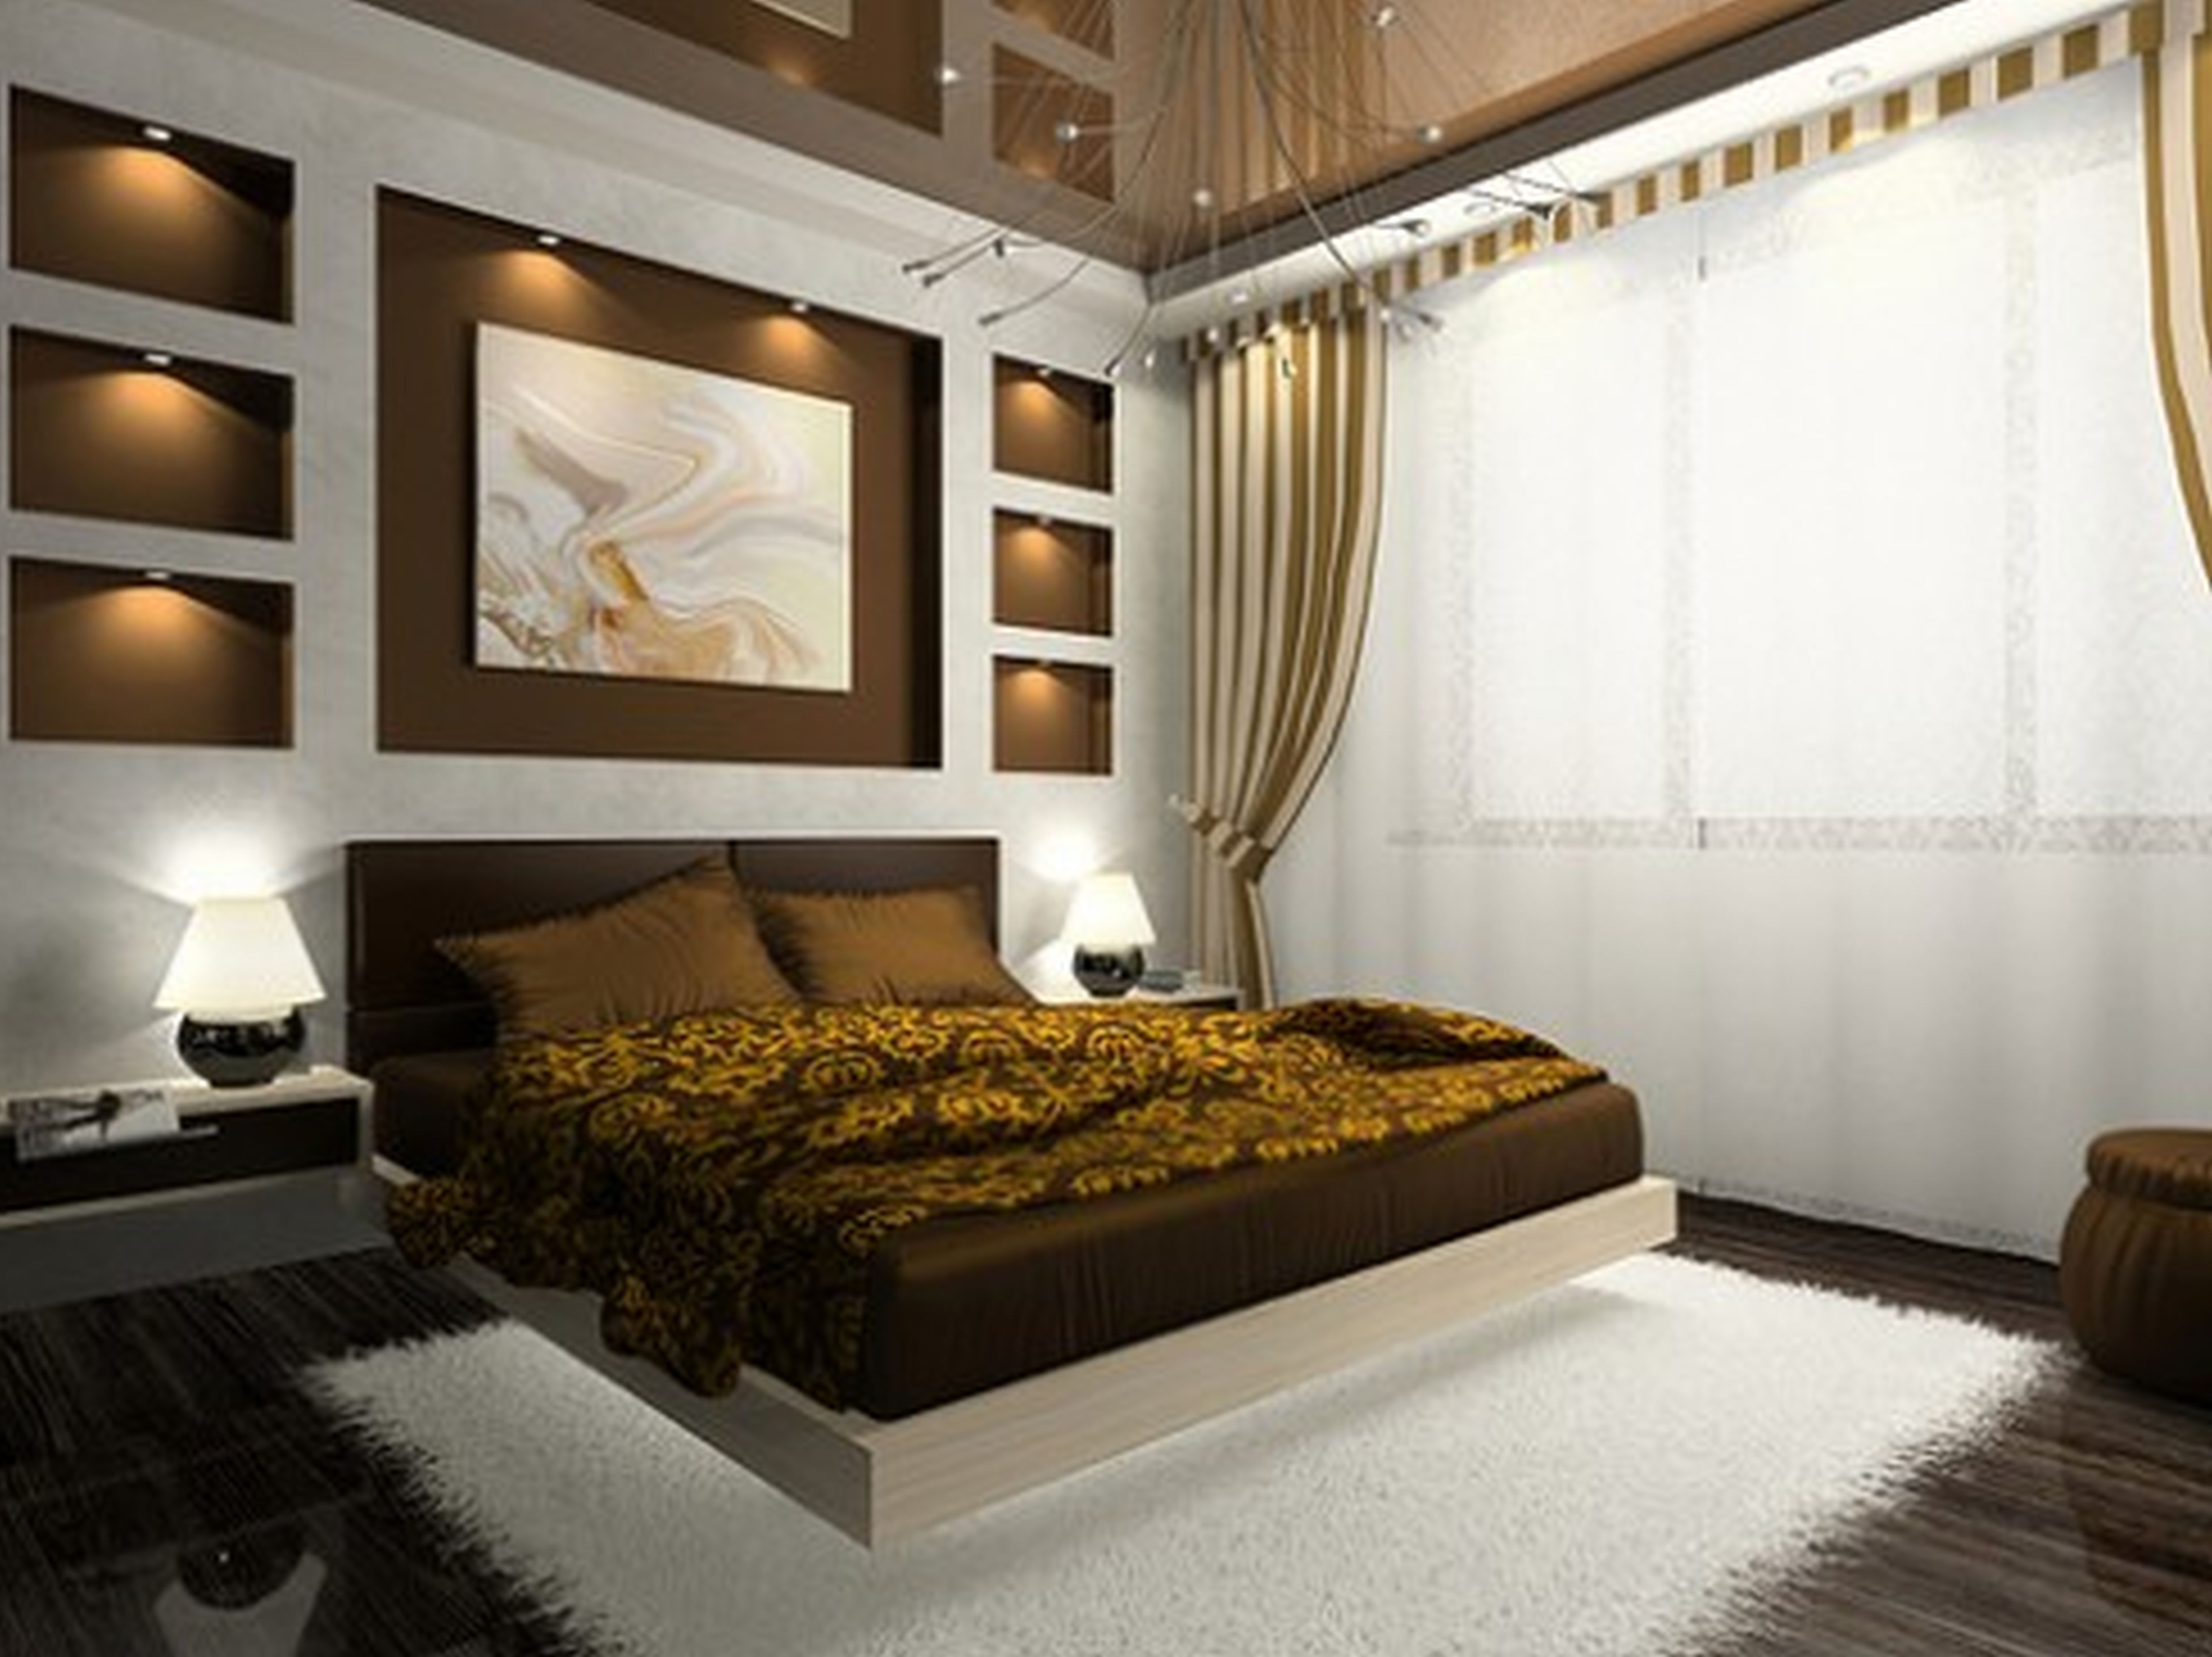 Modern Bedroom Decorating: Express Your Style And Comfort